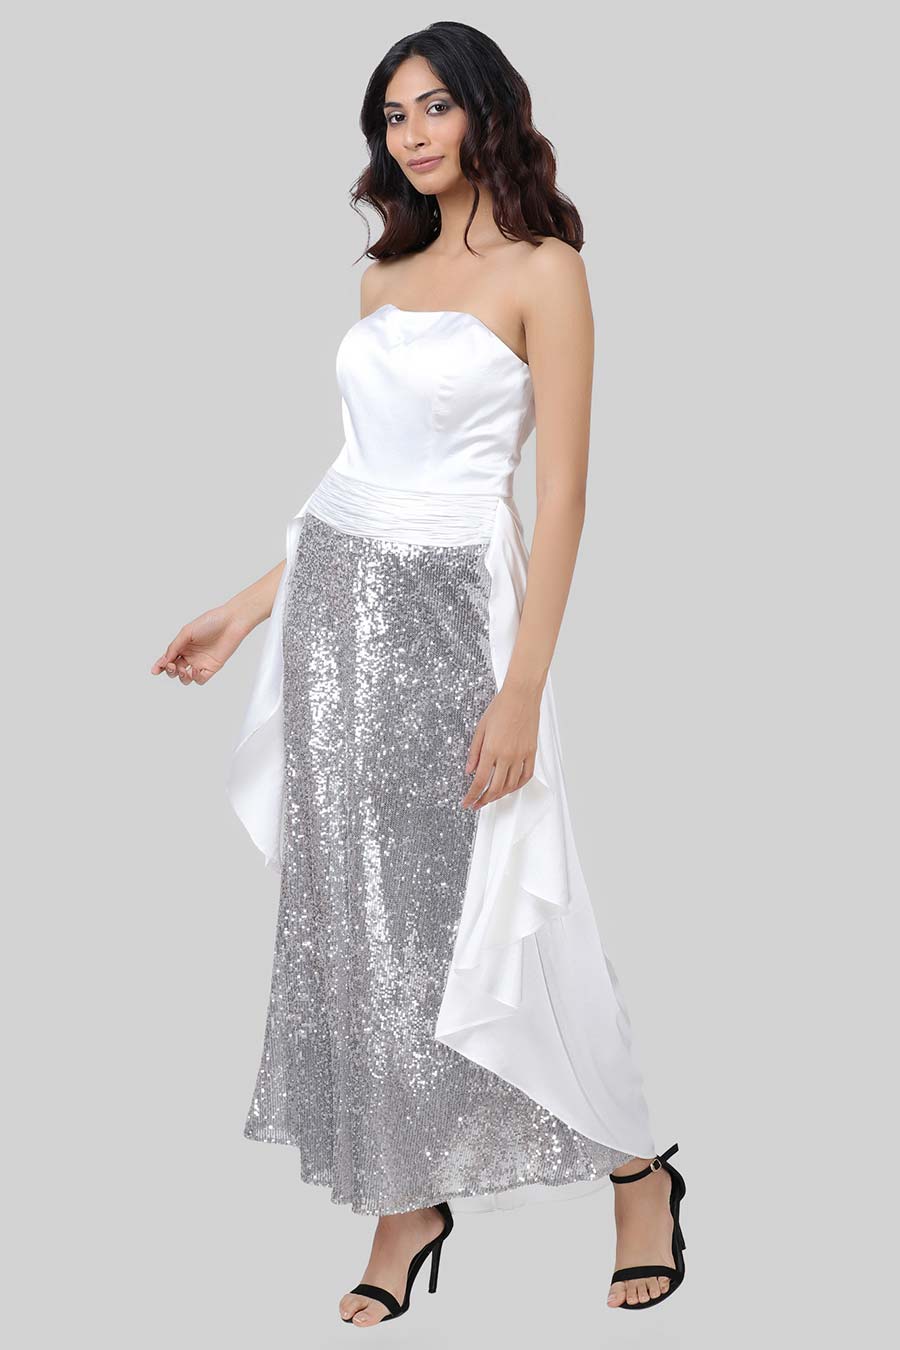 Pearl White Sequin Gown Dress